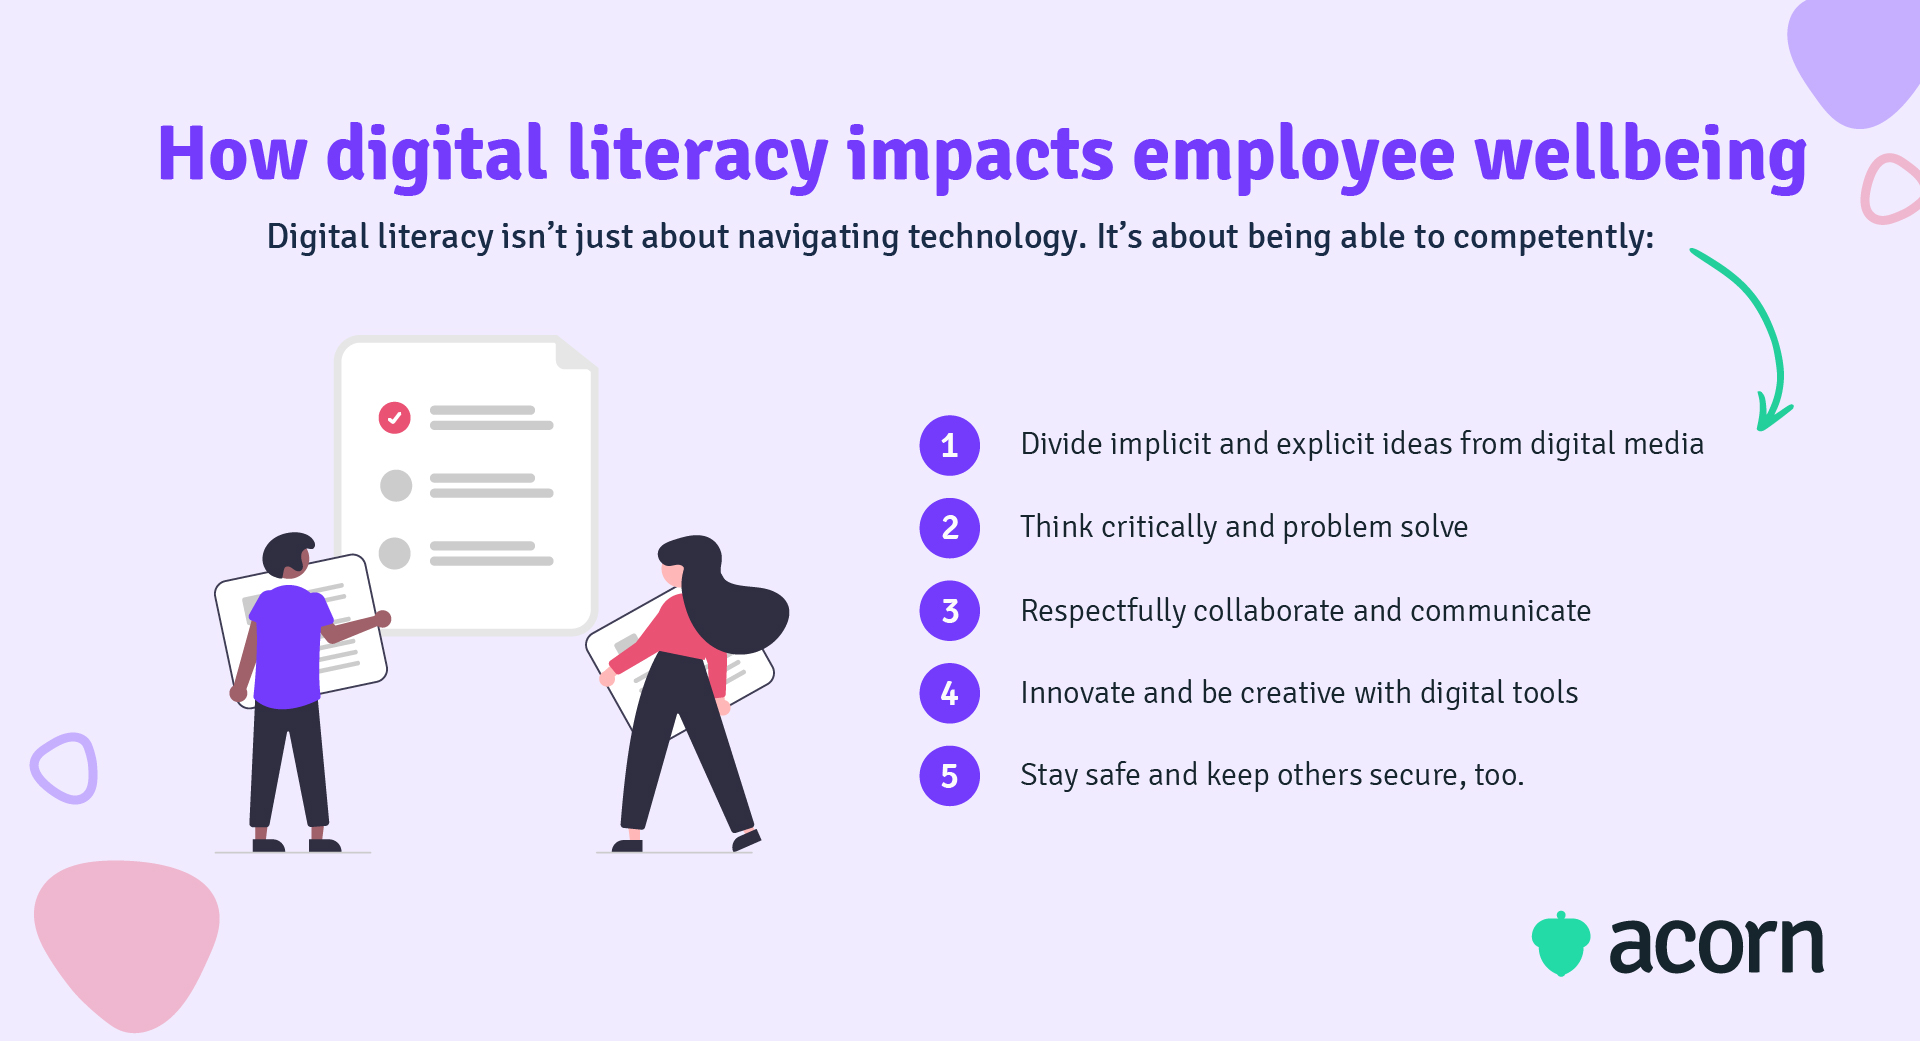 Infographic of five core ways digital literacy impacts employee wellbeing